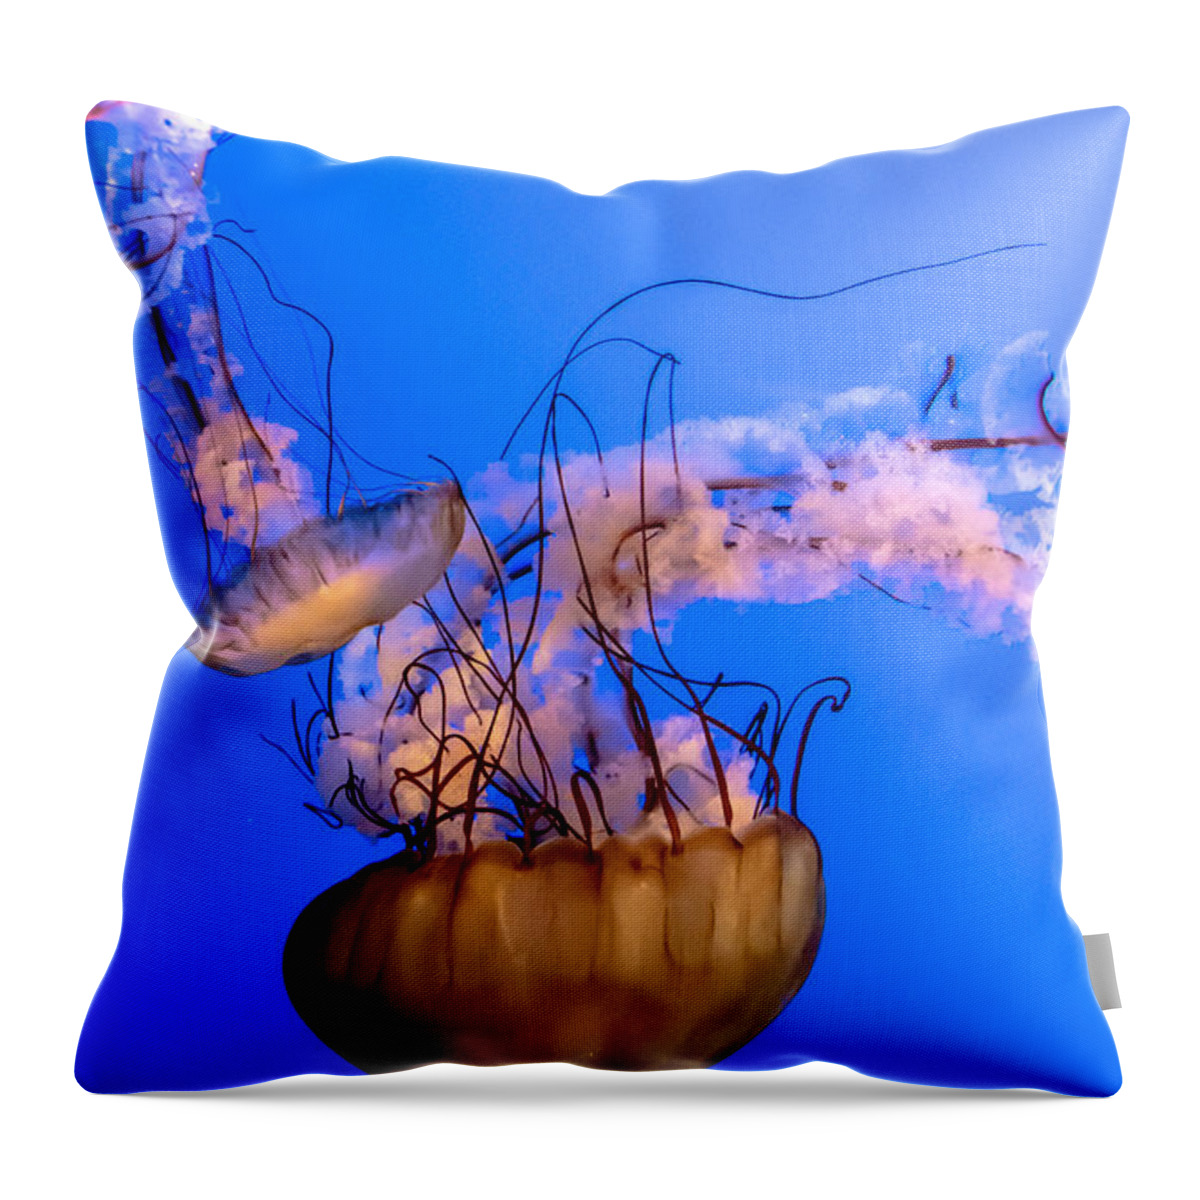 Deep Throw Pillow featuring the photograph Jelly Fish by Cheryl Baxter